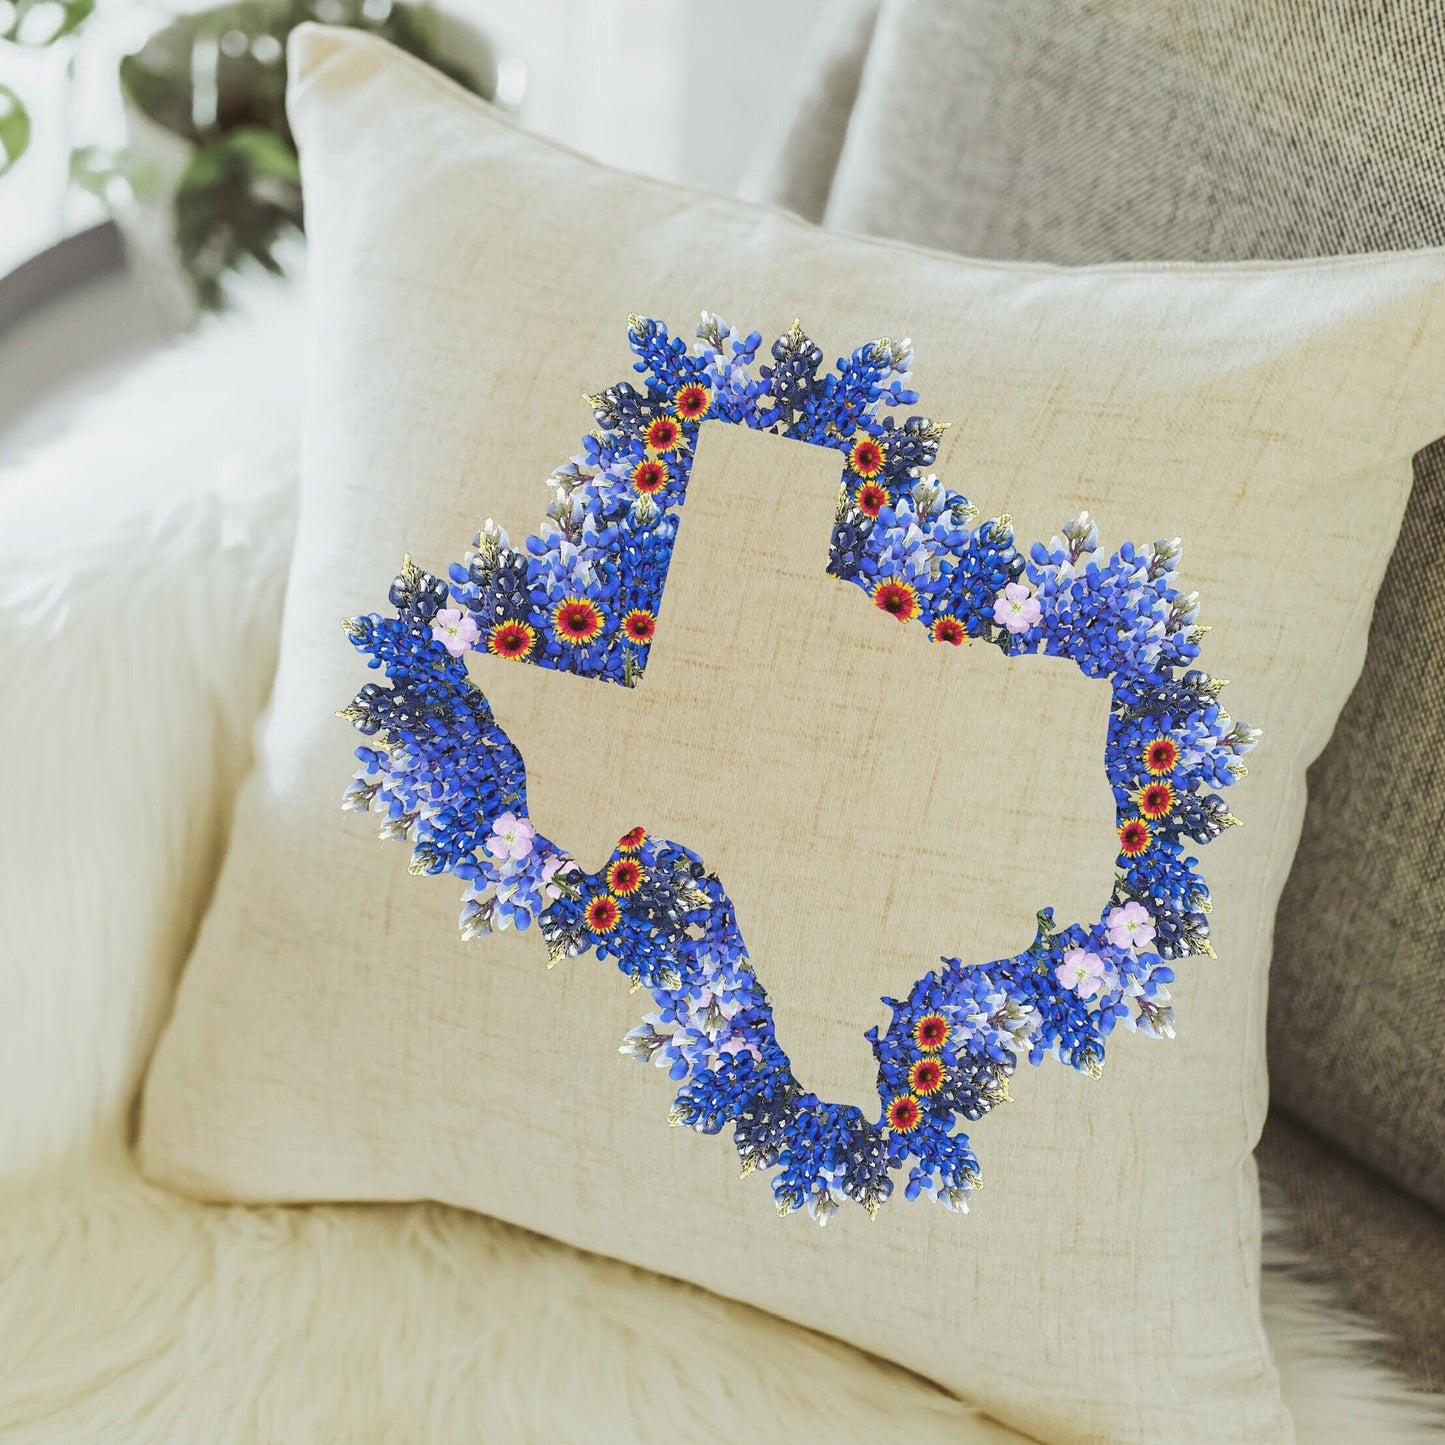 Outline of Texas in Bluebonnets pillow